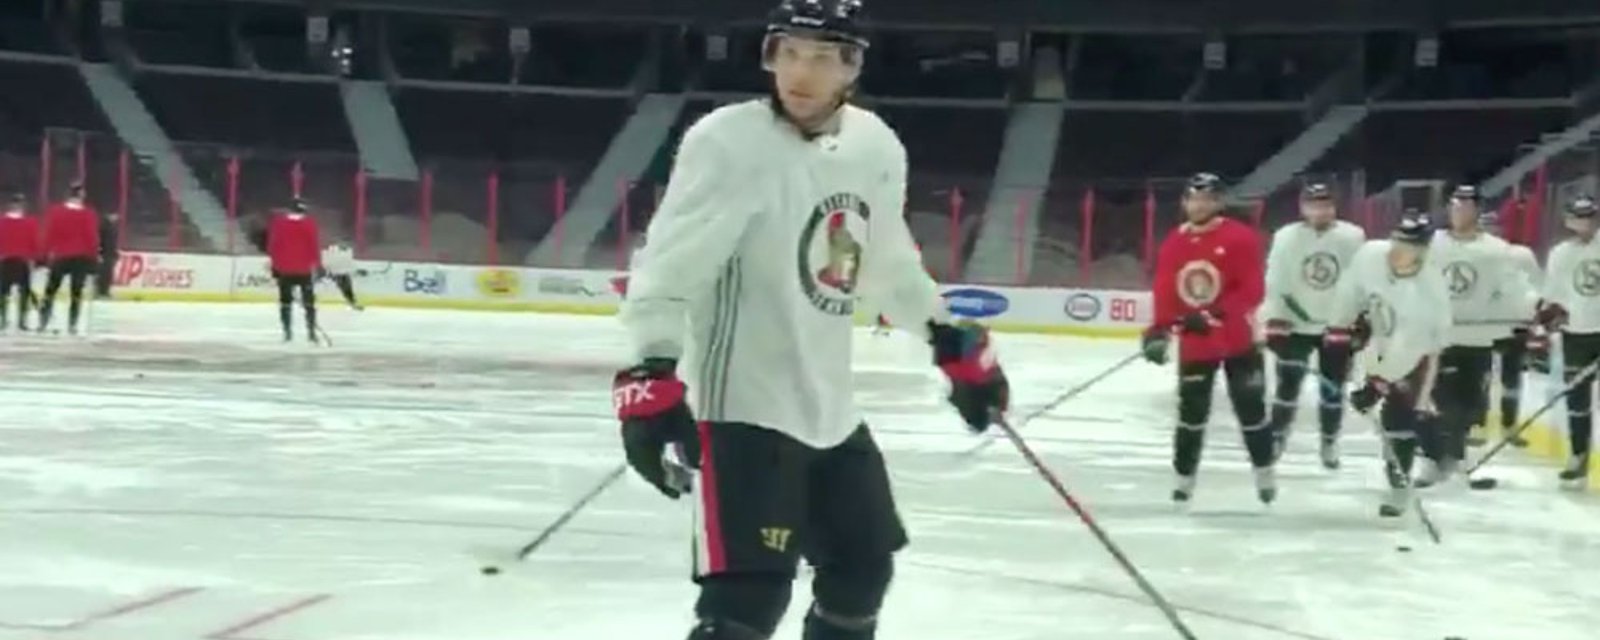 Bobby Ryan back with the Senators after tough time! 